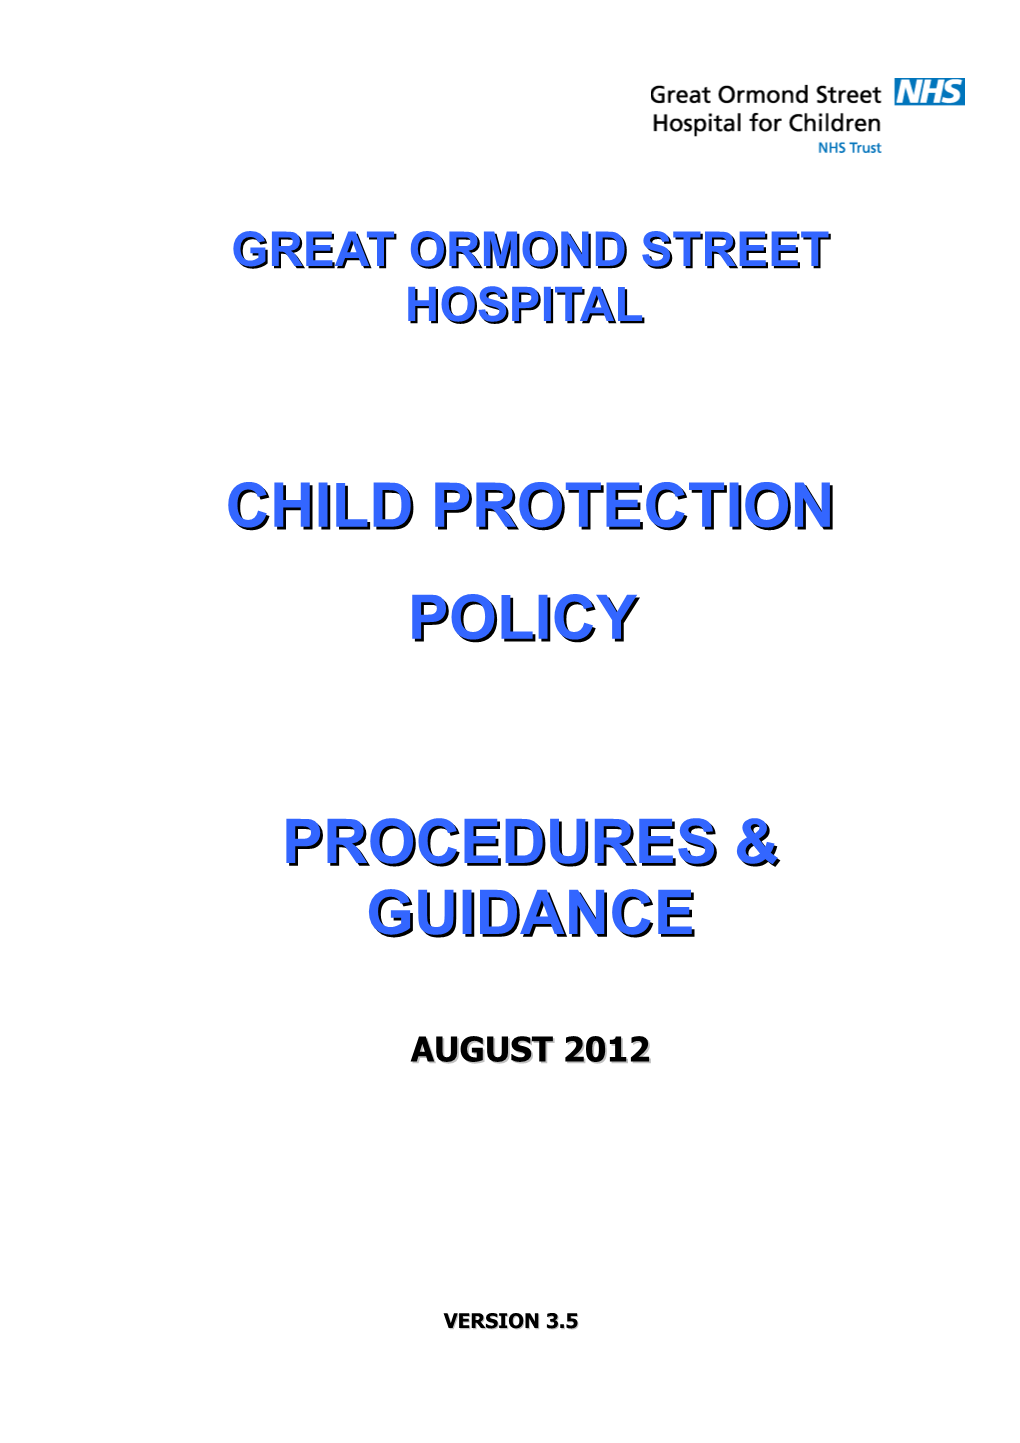 Child Protection Policies, Procedures and Guidance